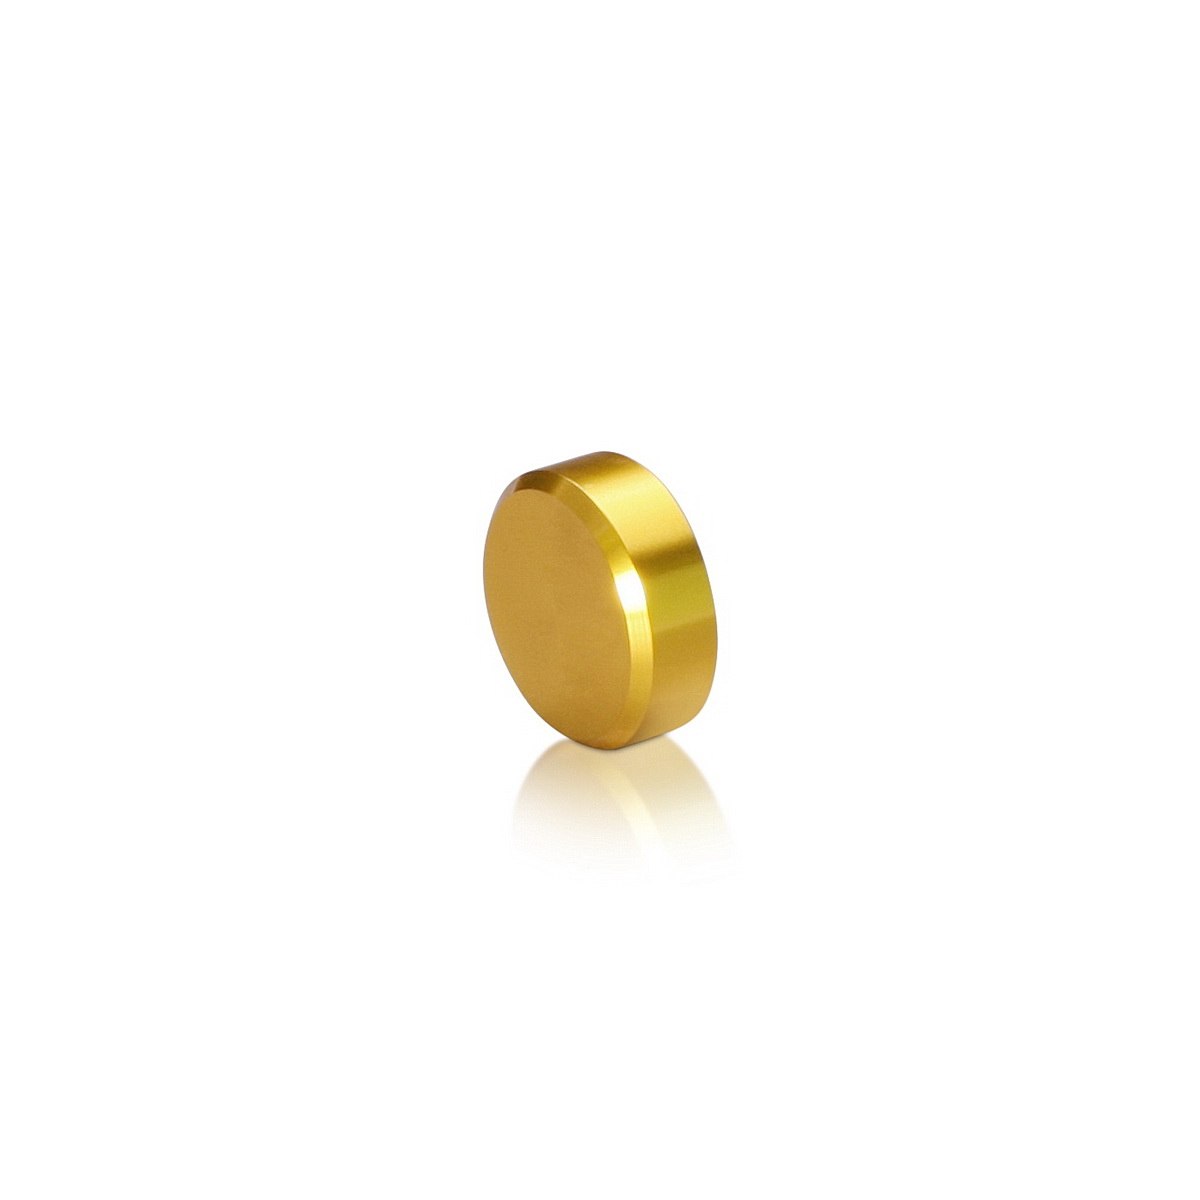 1/4-20 Threaded Caps Diameter: 3/4'', Height: 1/4'', Gold Anodized Aluminum [Required Material Hole Size: 5/16'']